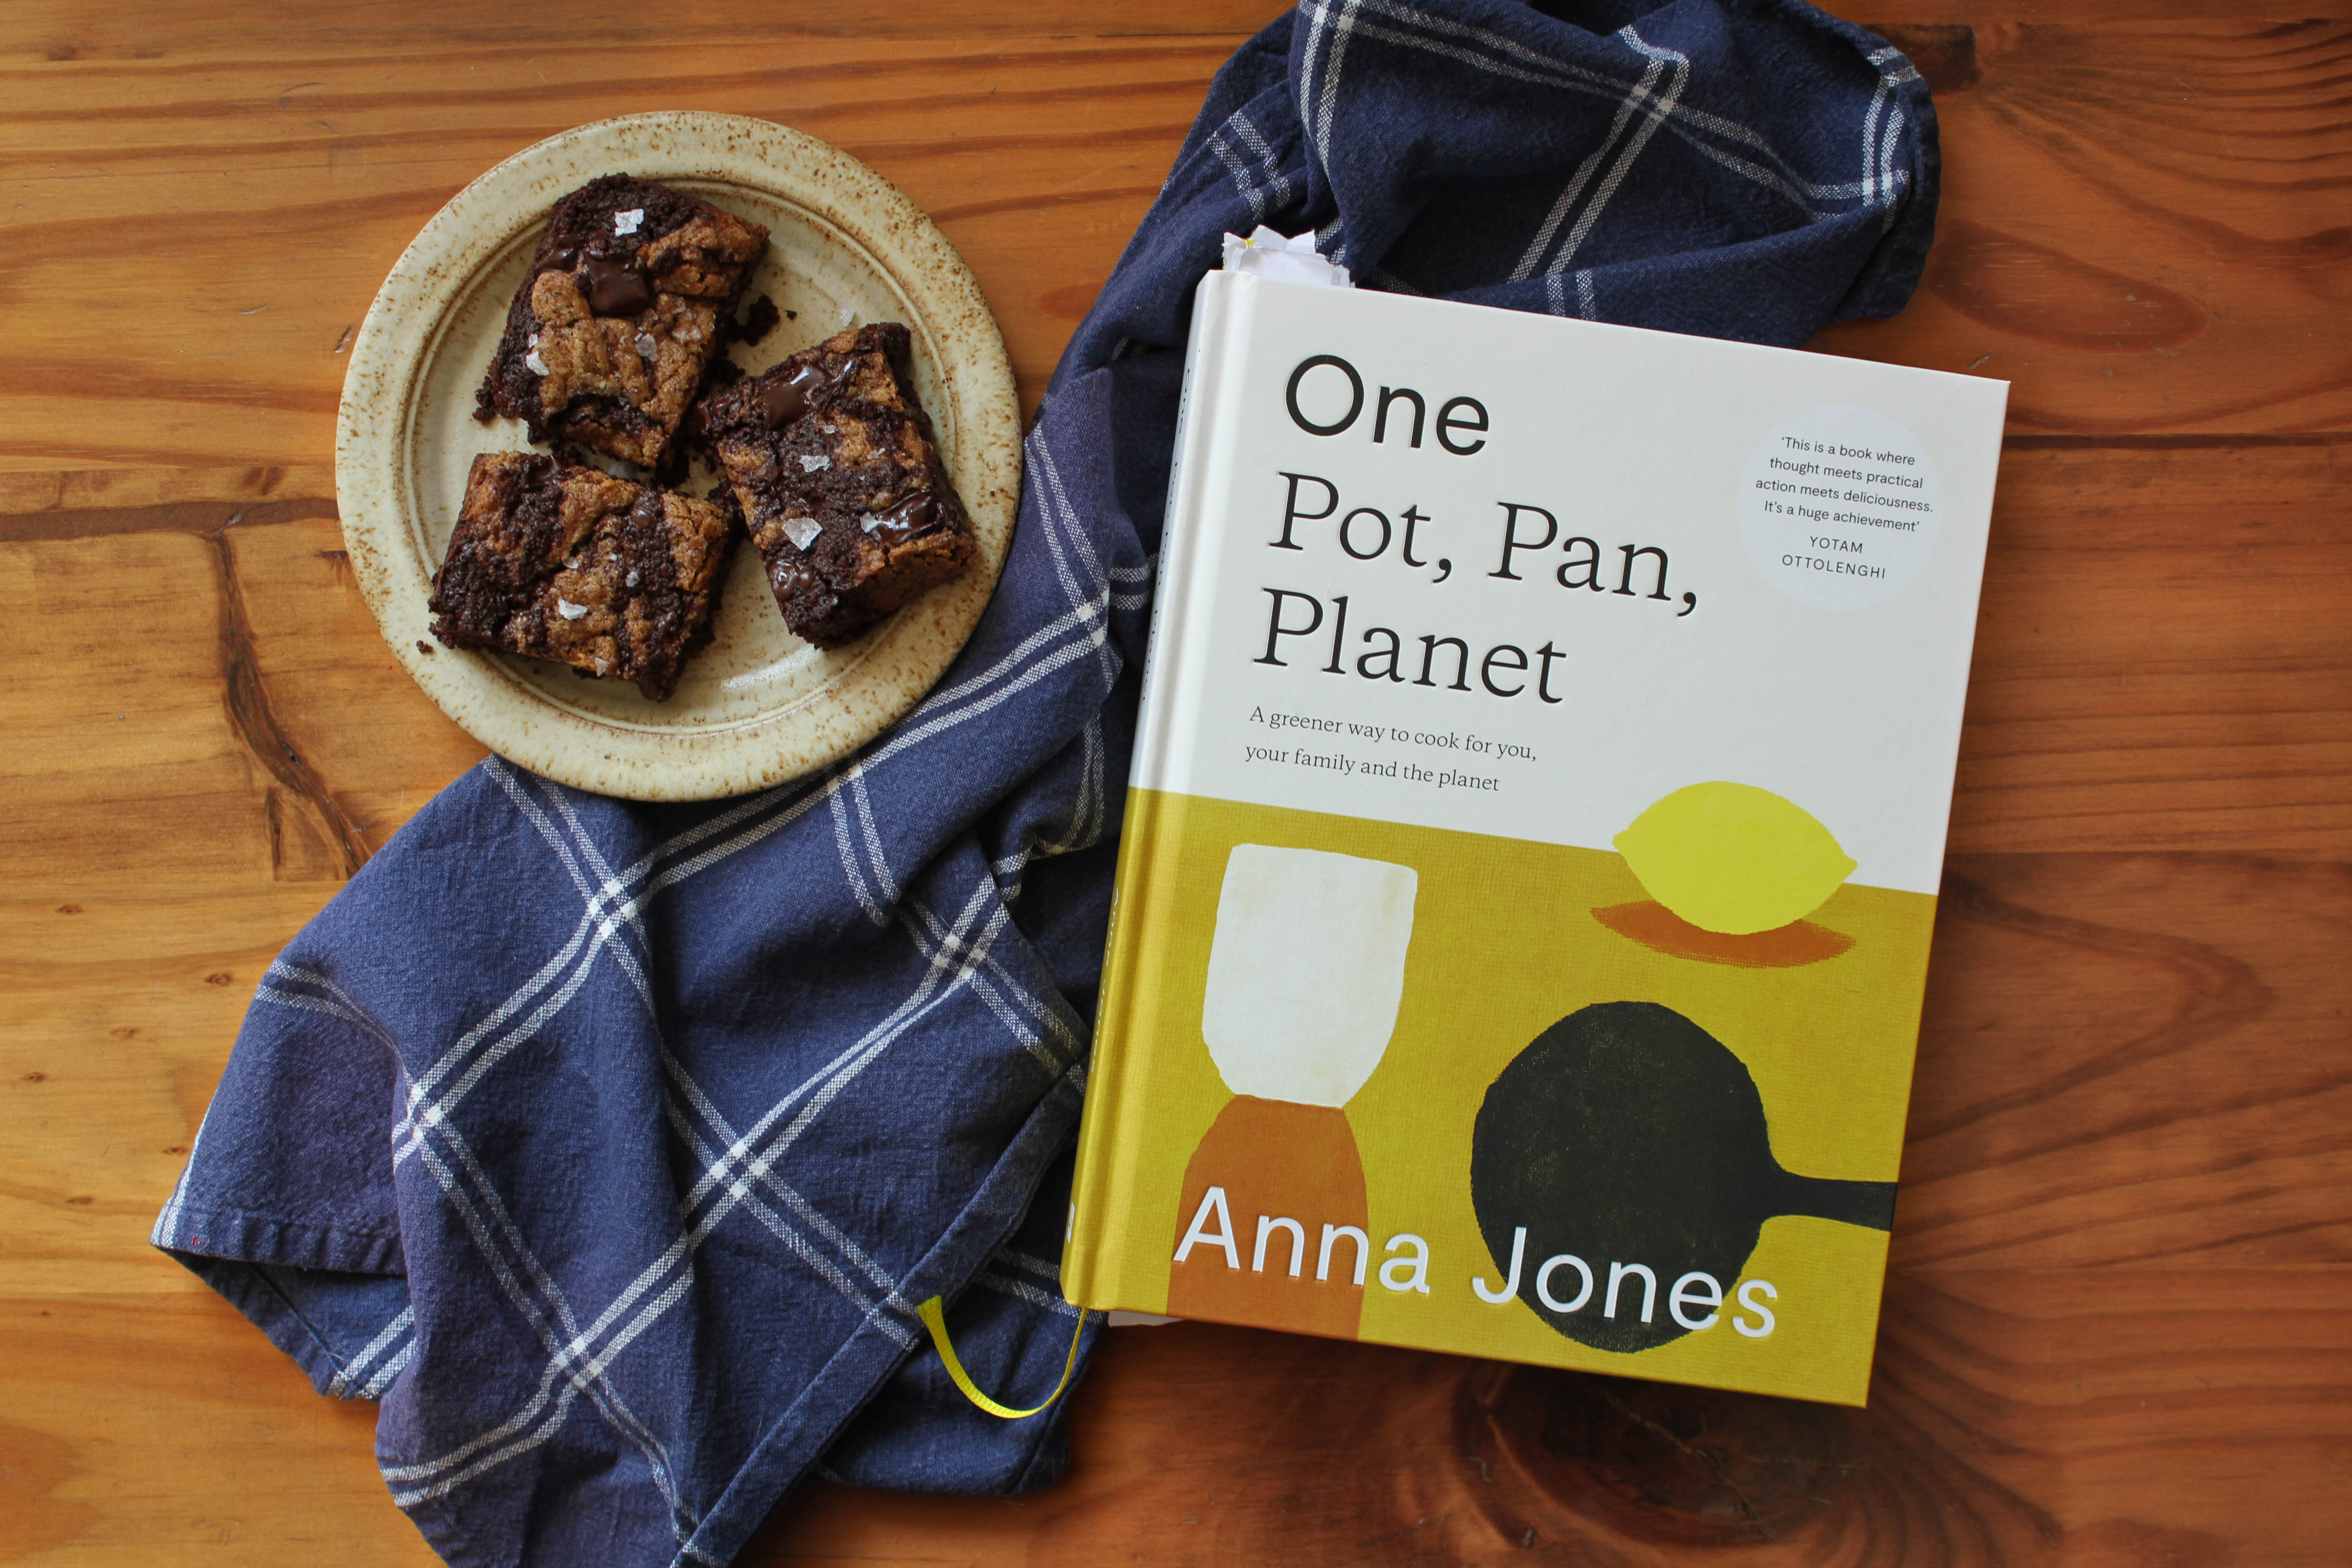 One: Pot, Pan, Planet: A Greener Way to Cook for You and Your Family: A Cookbook [Book]